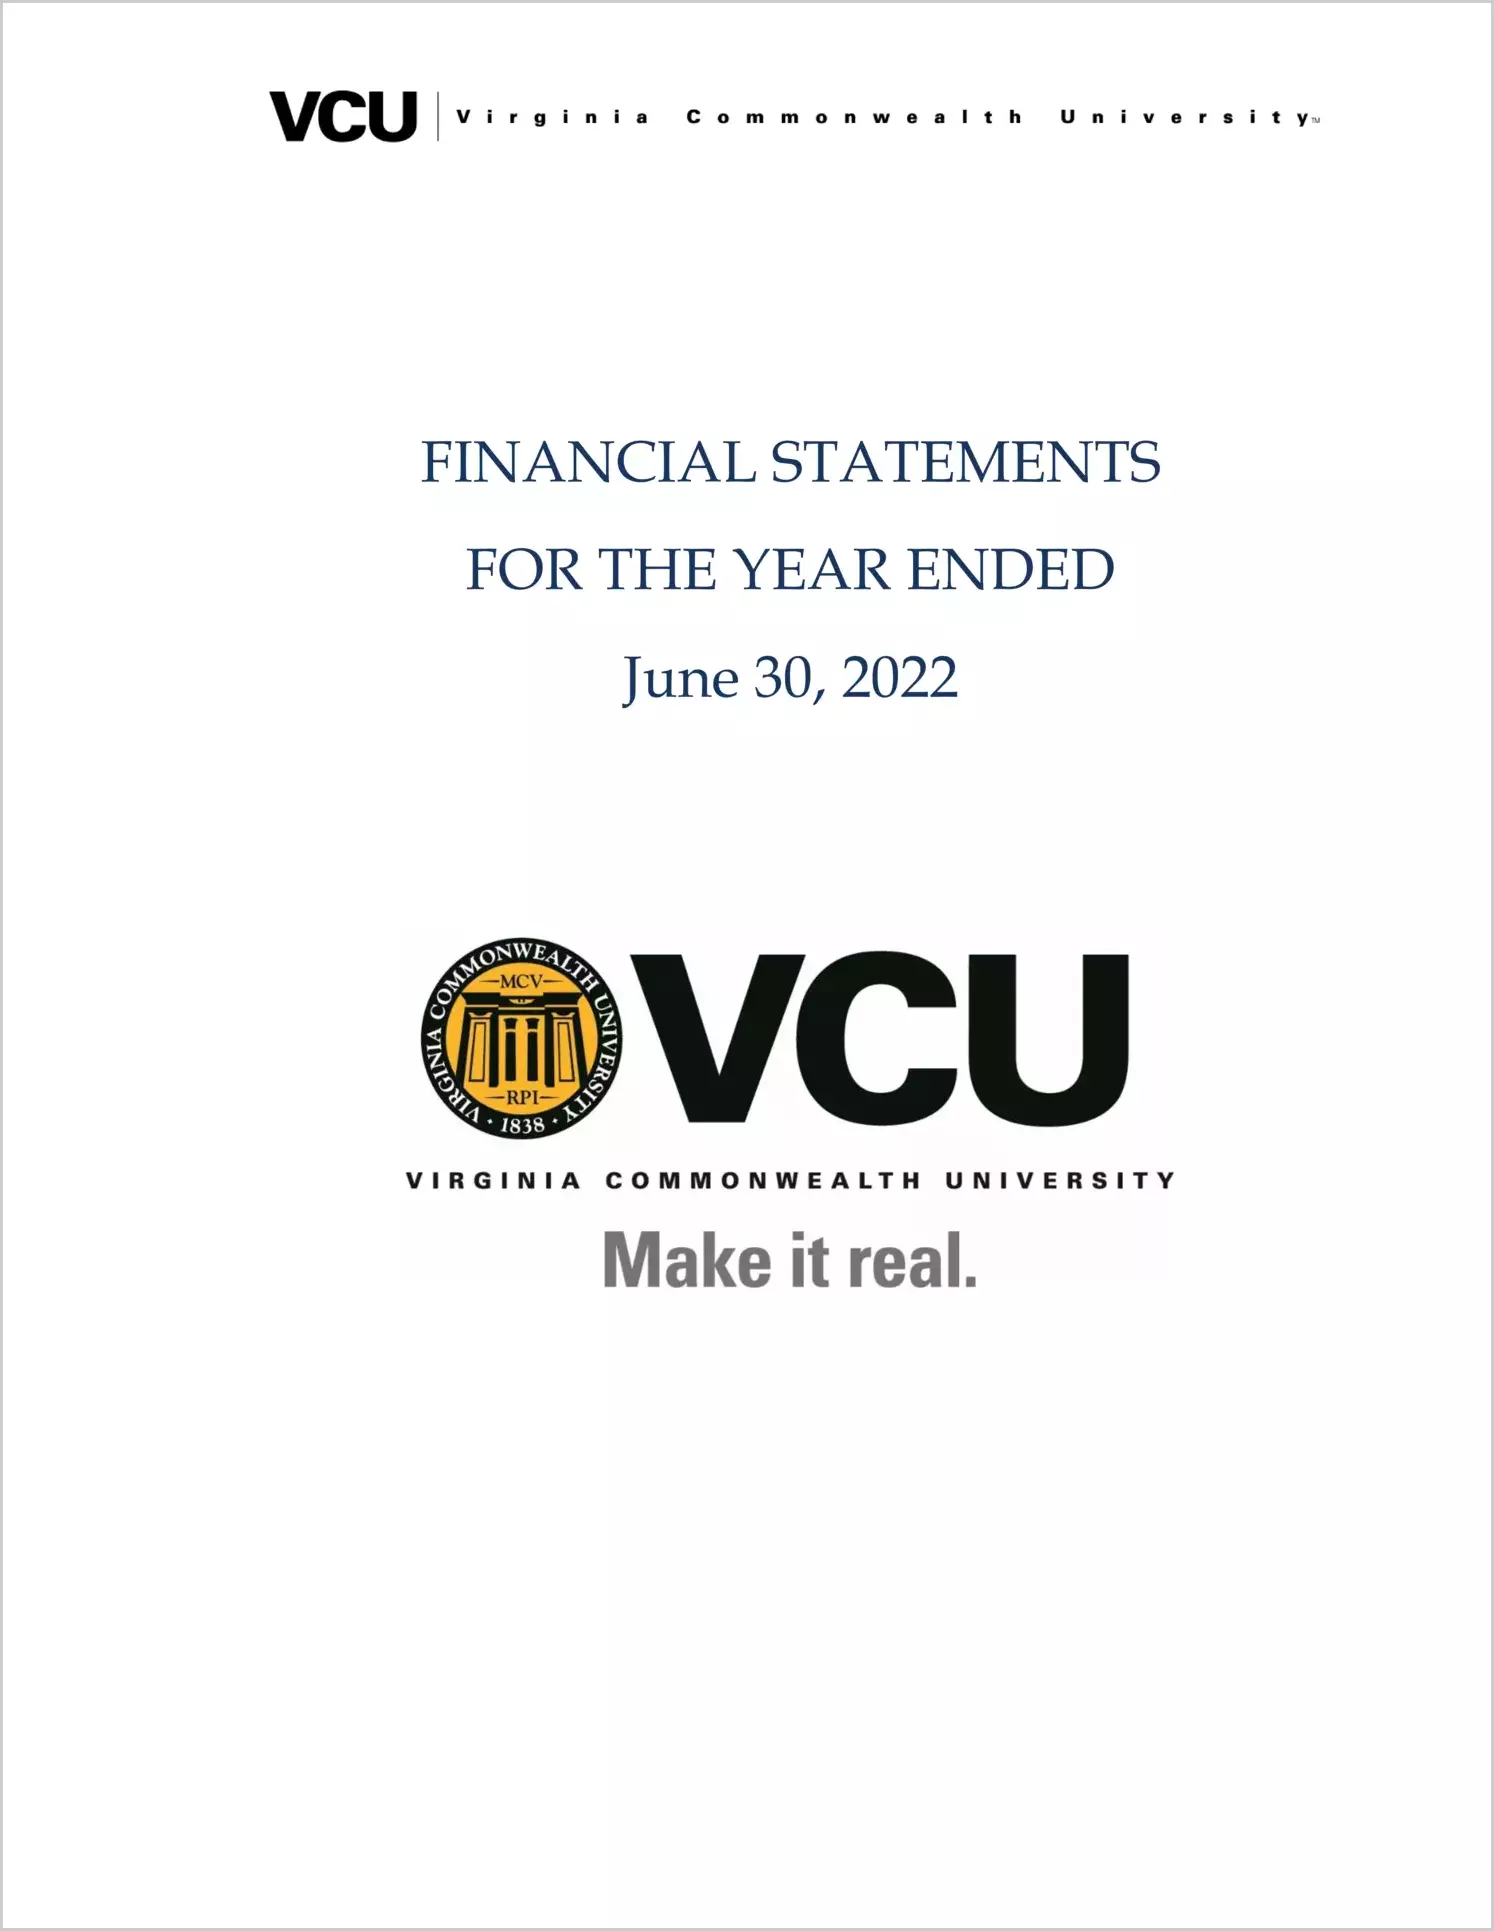 Virginia Commonwealth University Financial Statements for the year ended June 30, 2022